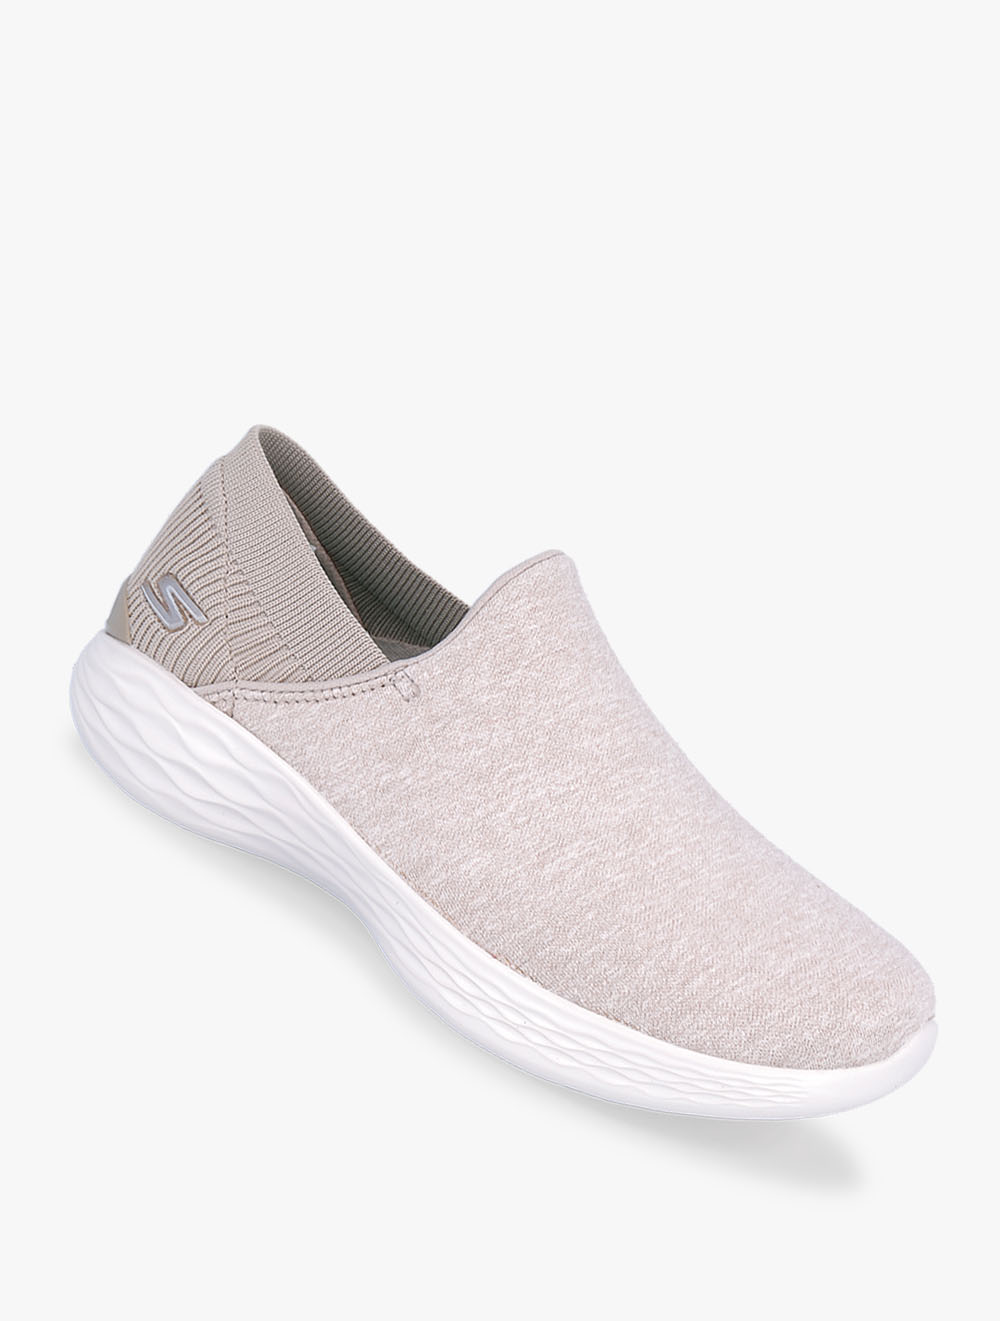 YOU - Intuition Women's Leisure Shoes